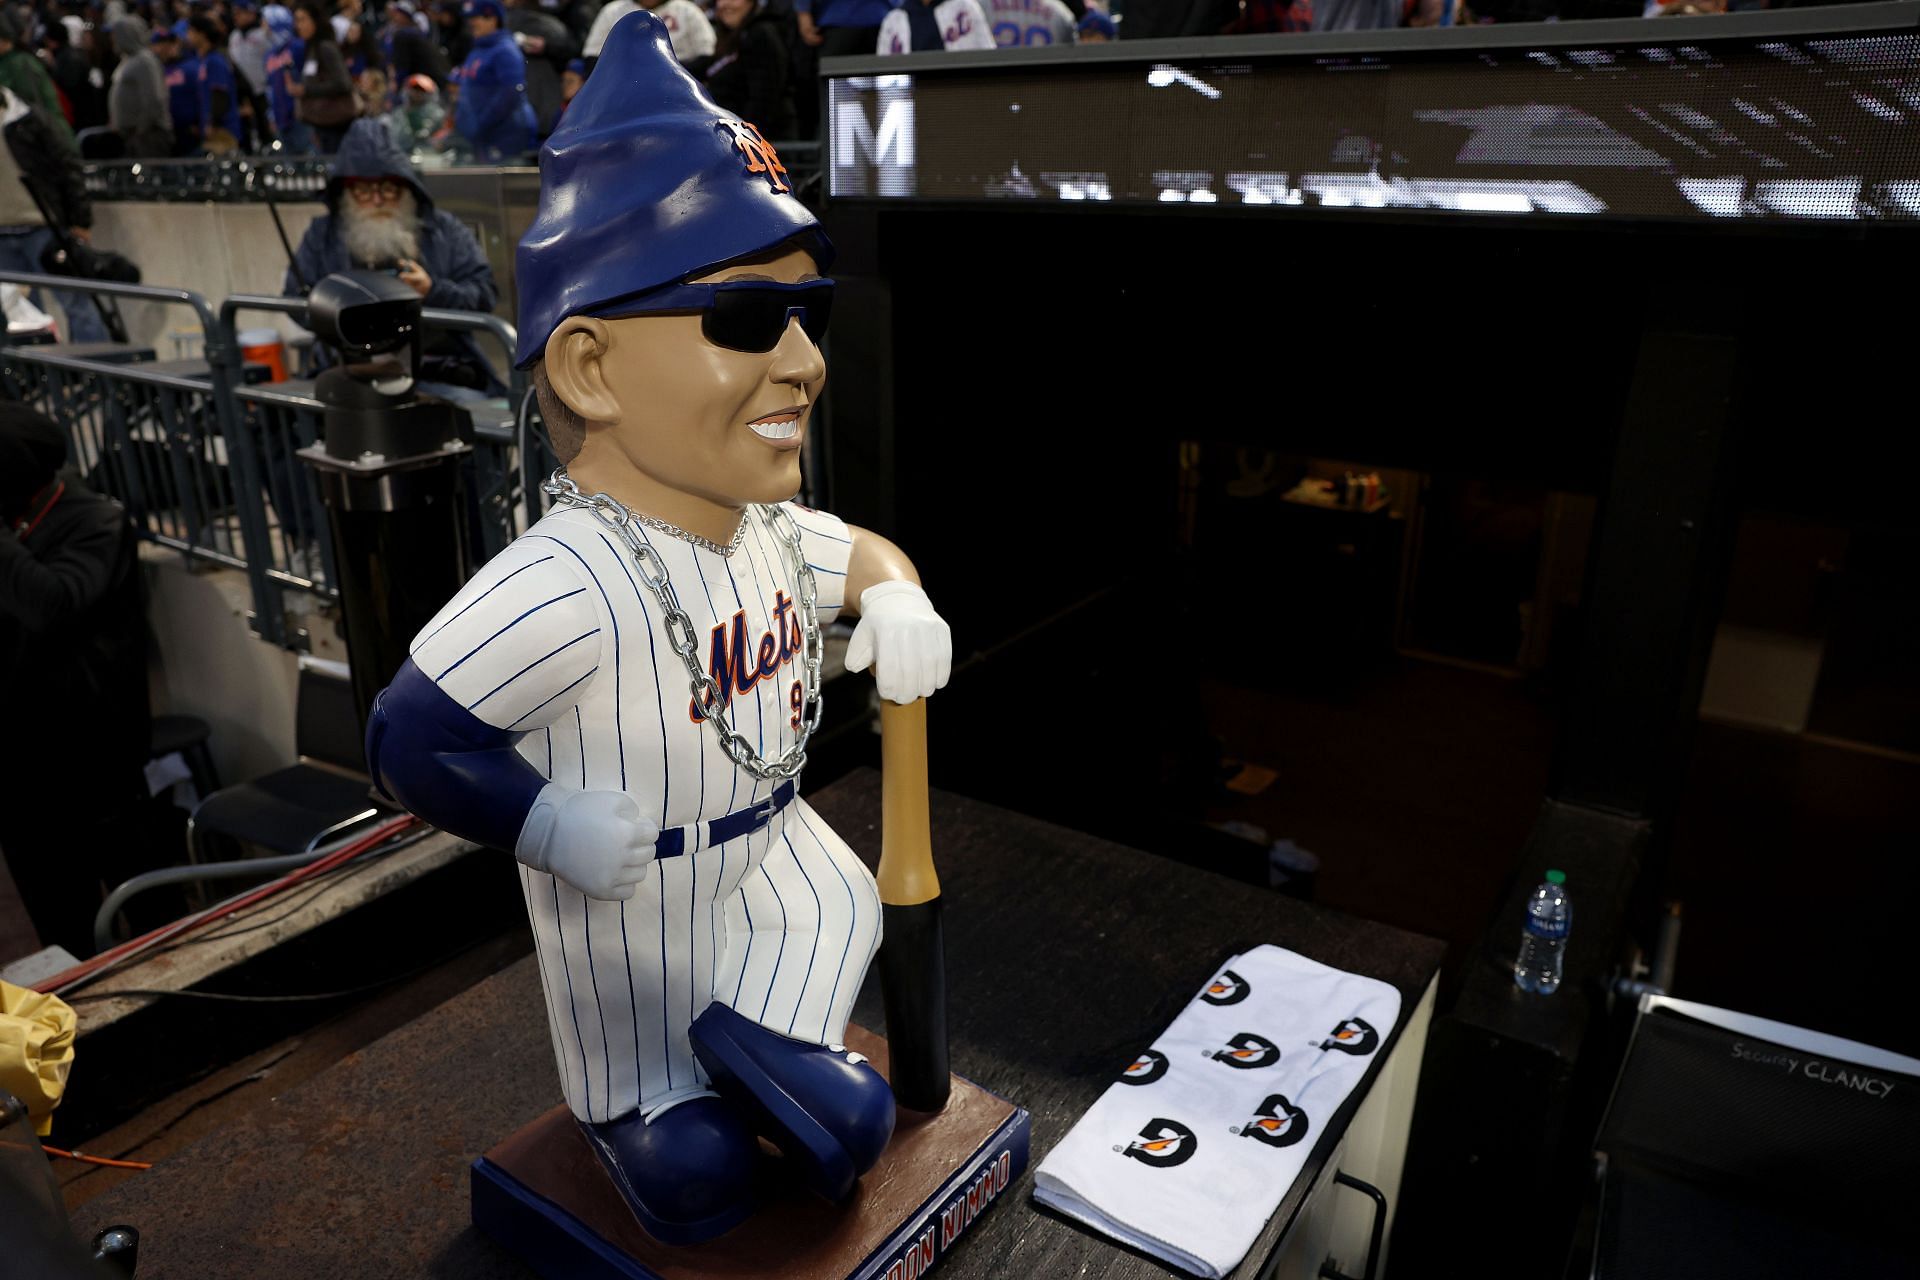 NY Mets may have a new good luck charm